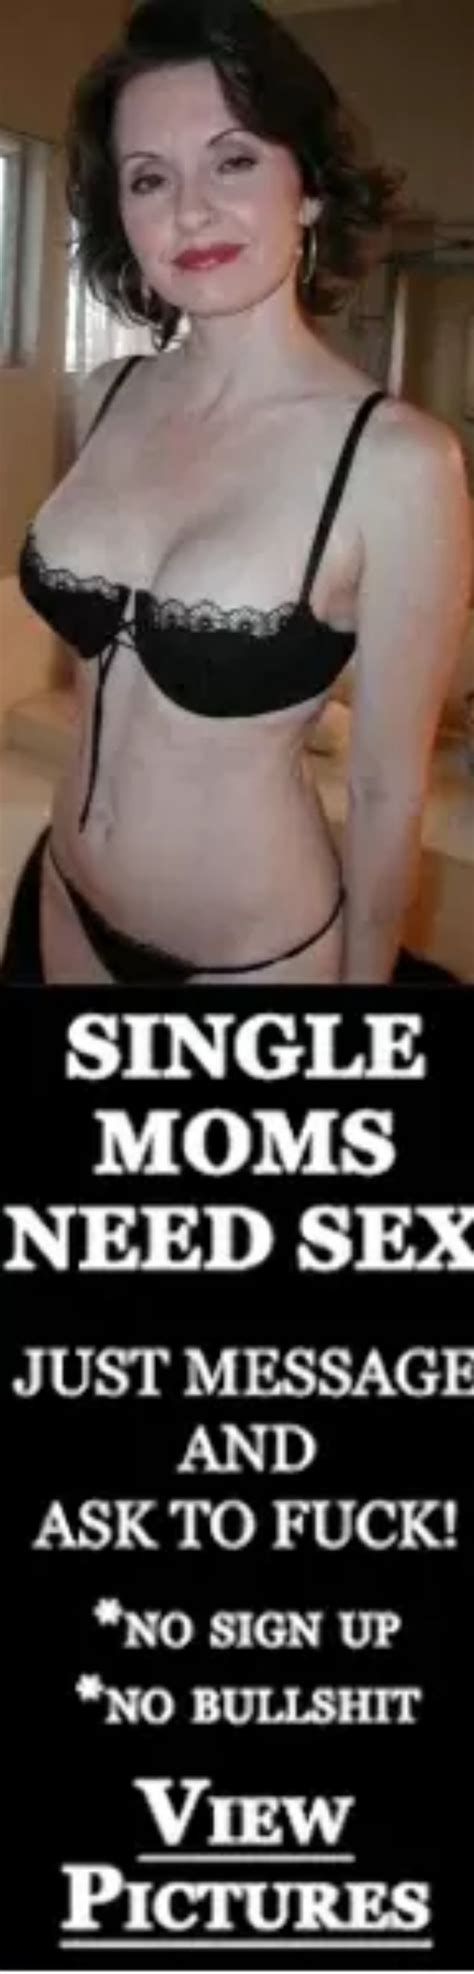 what s the name of this dark haired milf in single moms ad aunt nanci